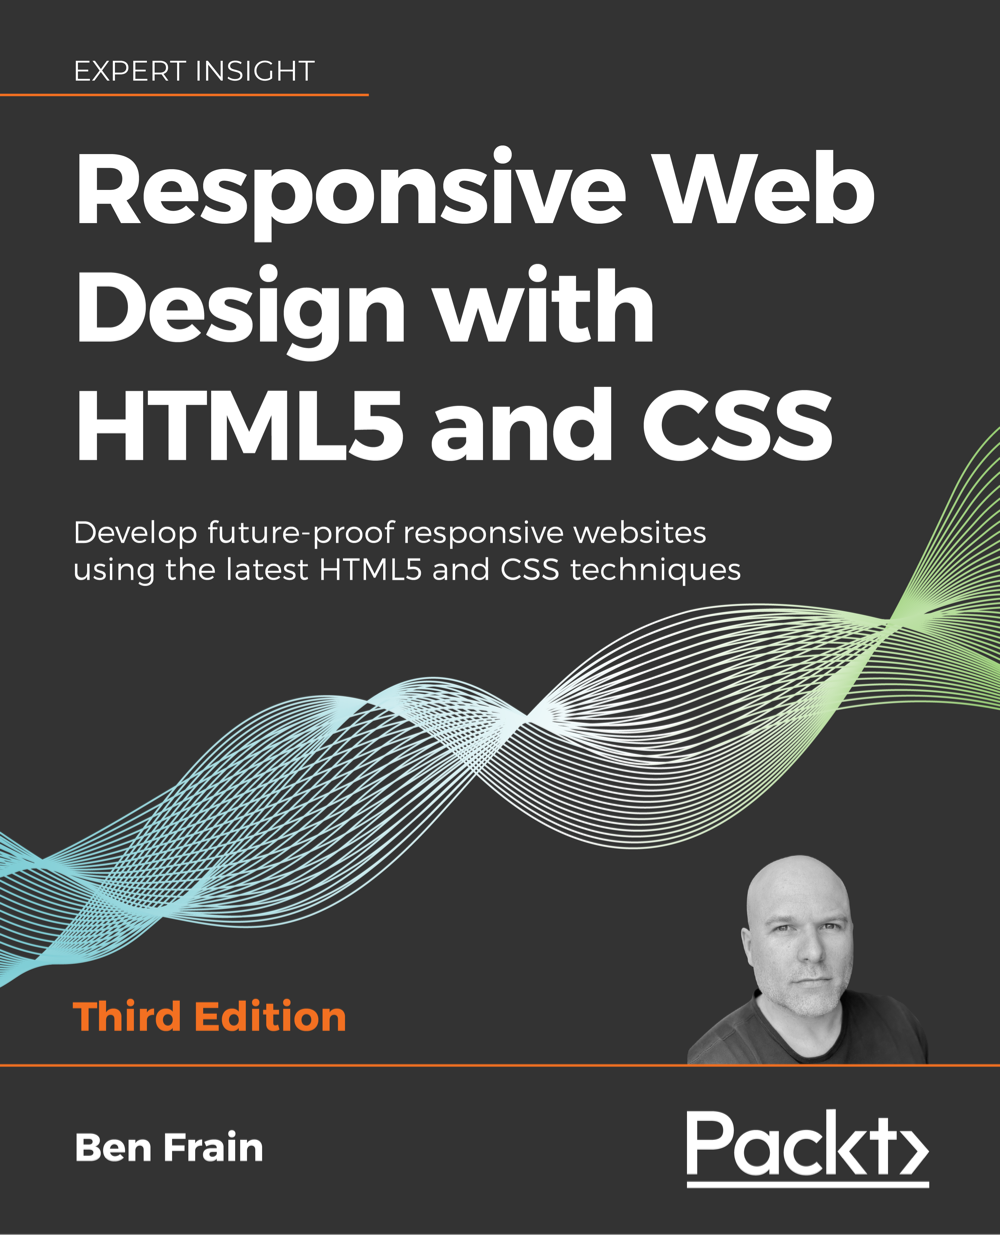 Book cover of Responsive Web Design with HTML5 and CSS by Ben Frain